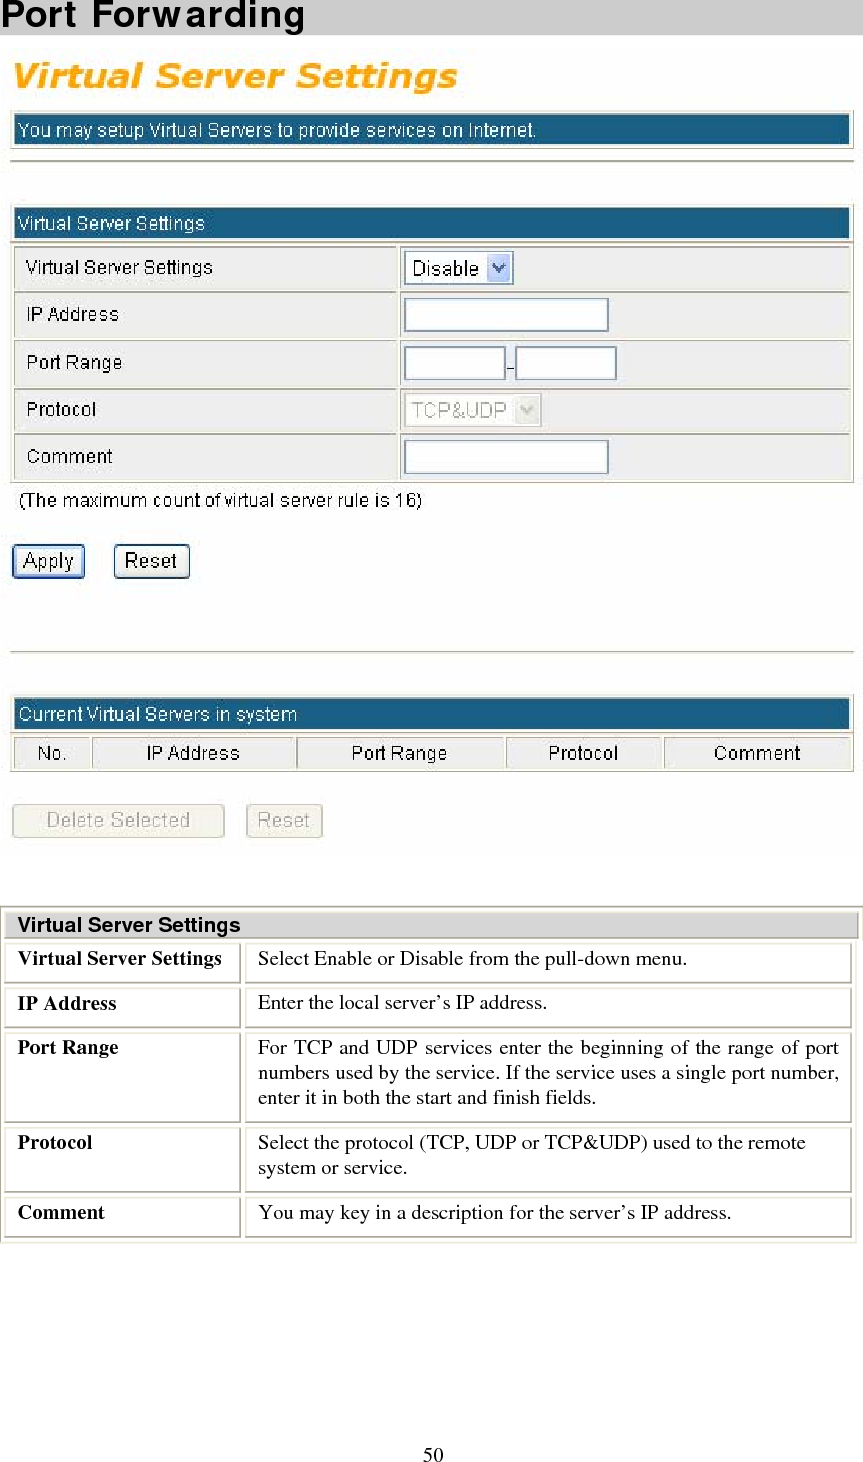   50 Port Forwarding   Virtual Server Settings Virtual Server Settings  Select Enable or Disable from the pull-down menu. IP Address  Enter the local server’s IP address. Port Range  For TCP and UDP services enter the beginning of the range of port numbers used by the service. If the service uses a single port number, enter it in both the start and finish fields. Protocol  Select the protocol (TCP, UDP or TCP&amp;UDP) used to the remote system or service. Comment  You may key in a description for the server’s IP address.  